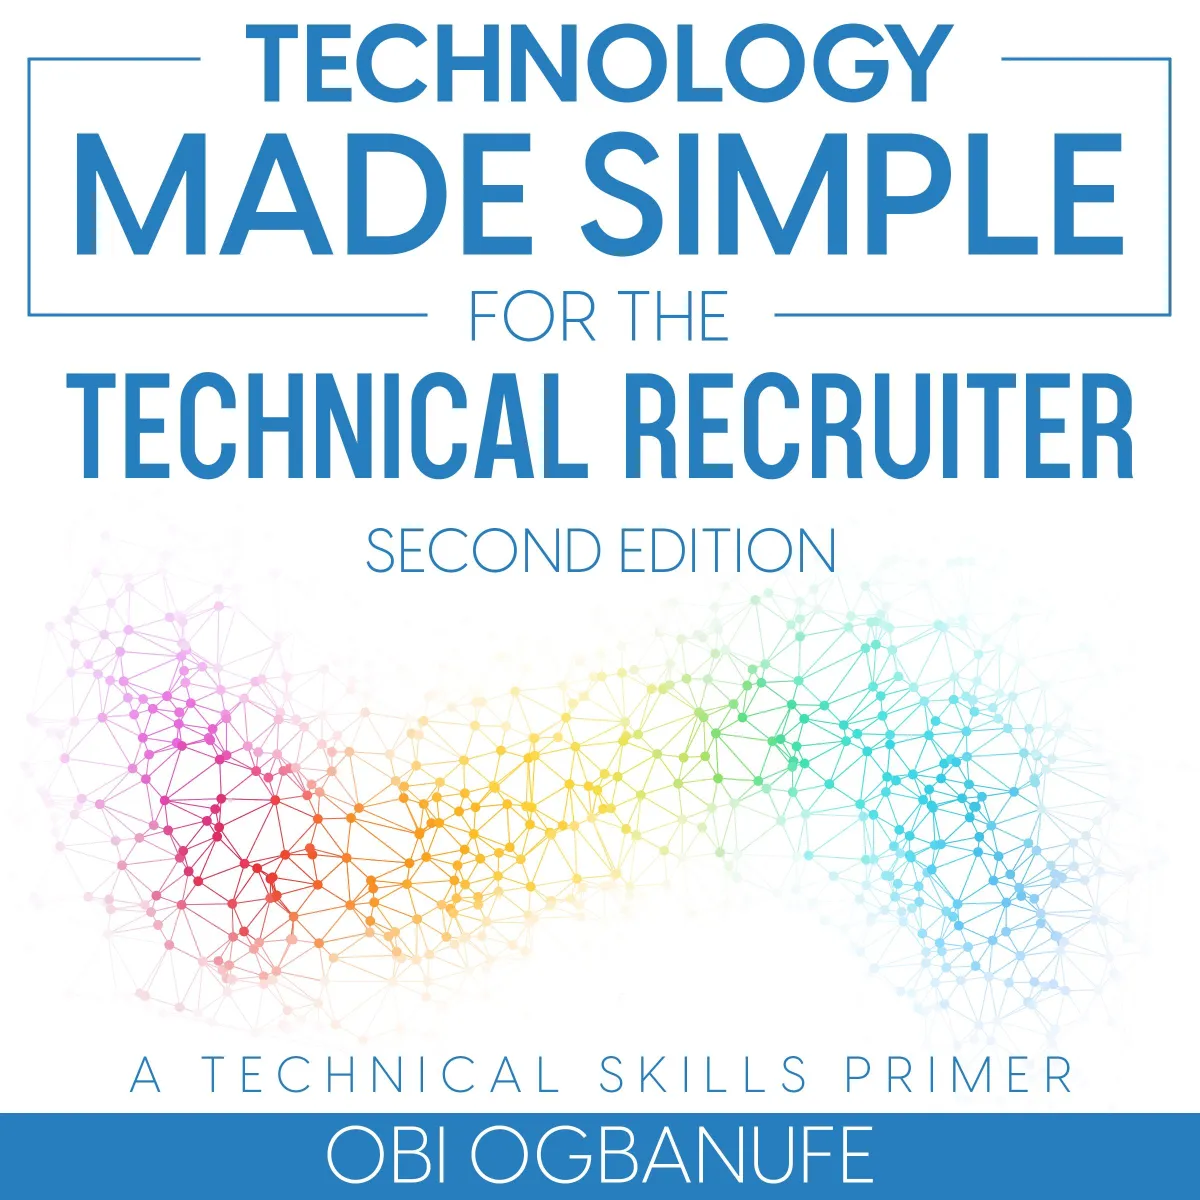 Technology Made Simple for the Technical Recruiter: 2nd Edition